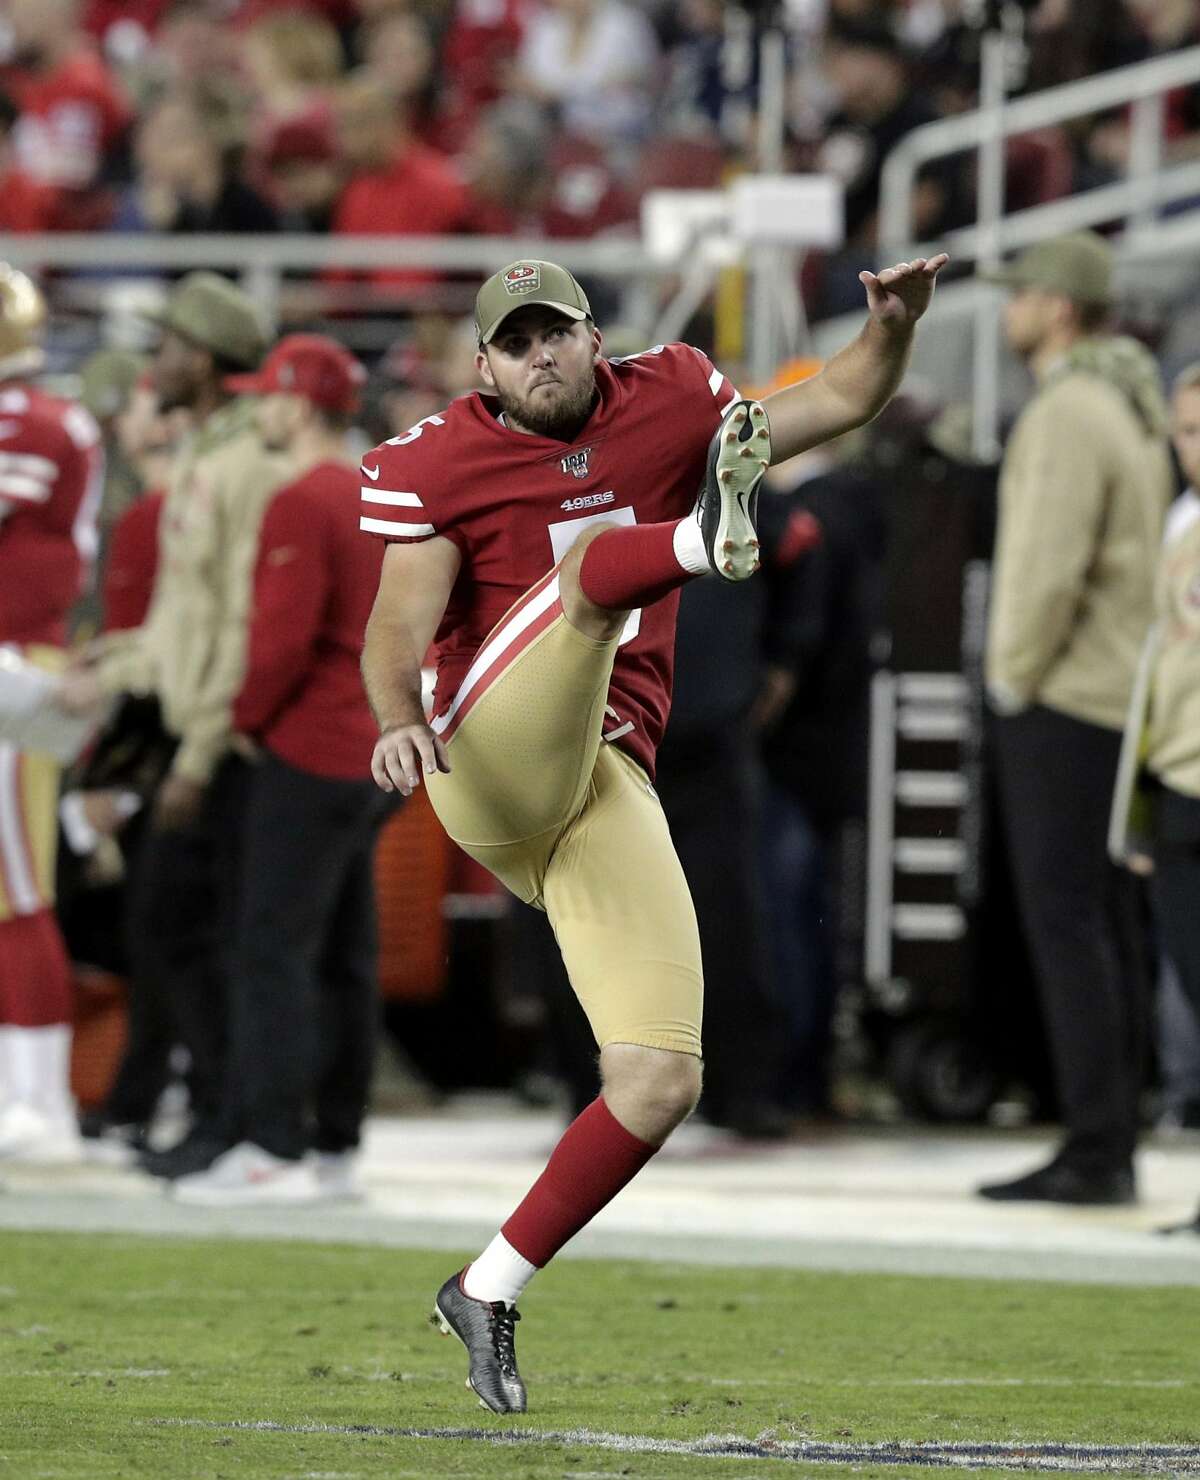 Chase McLaughlin (5) warms up on the field during a timeout in the first half as the San Francisco 49ers played the Seattle Seahawks at Levi’s Stadium in Santa Clara, Calif., on Monday, November 11/11/19, 2019.